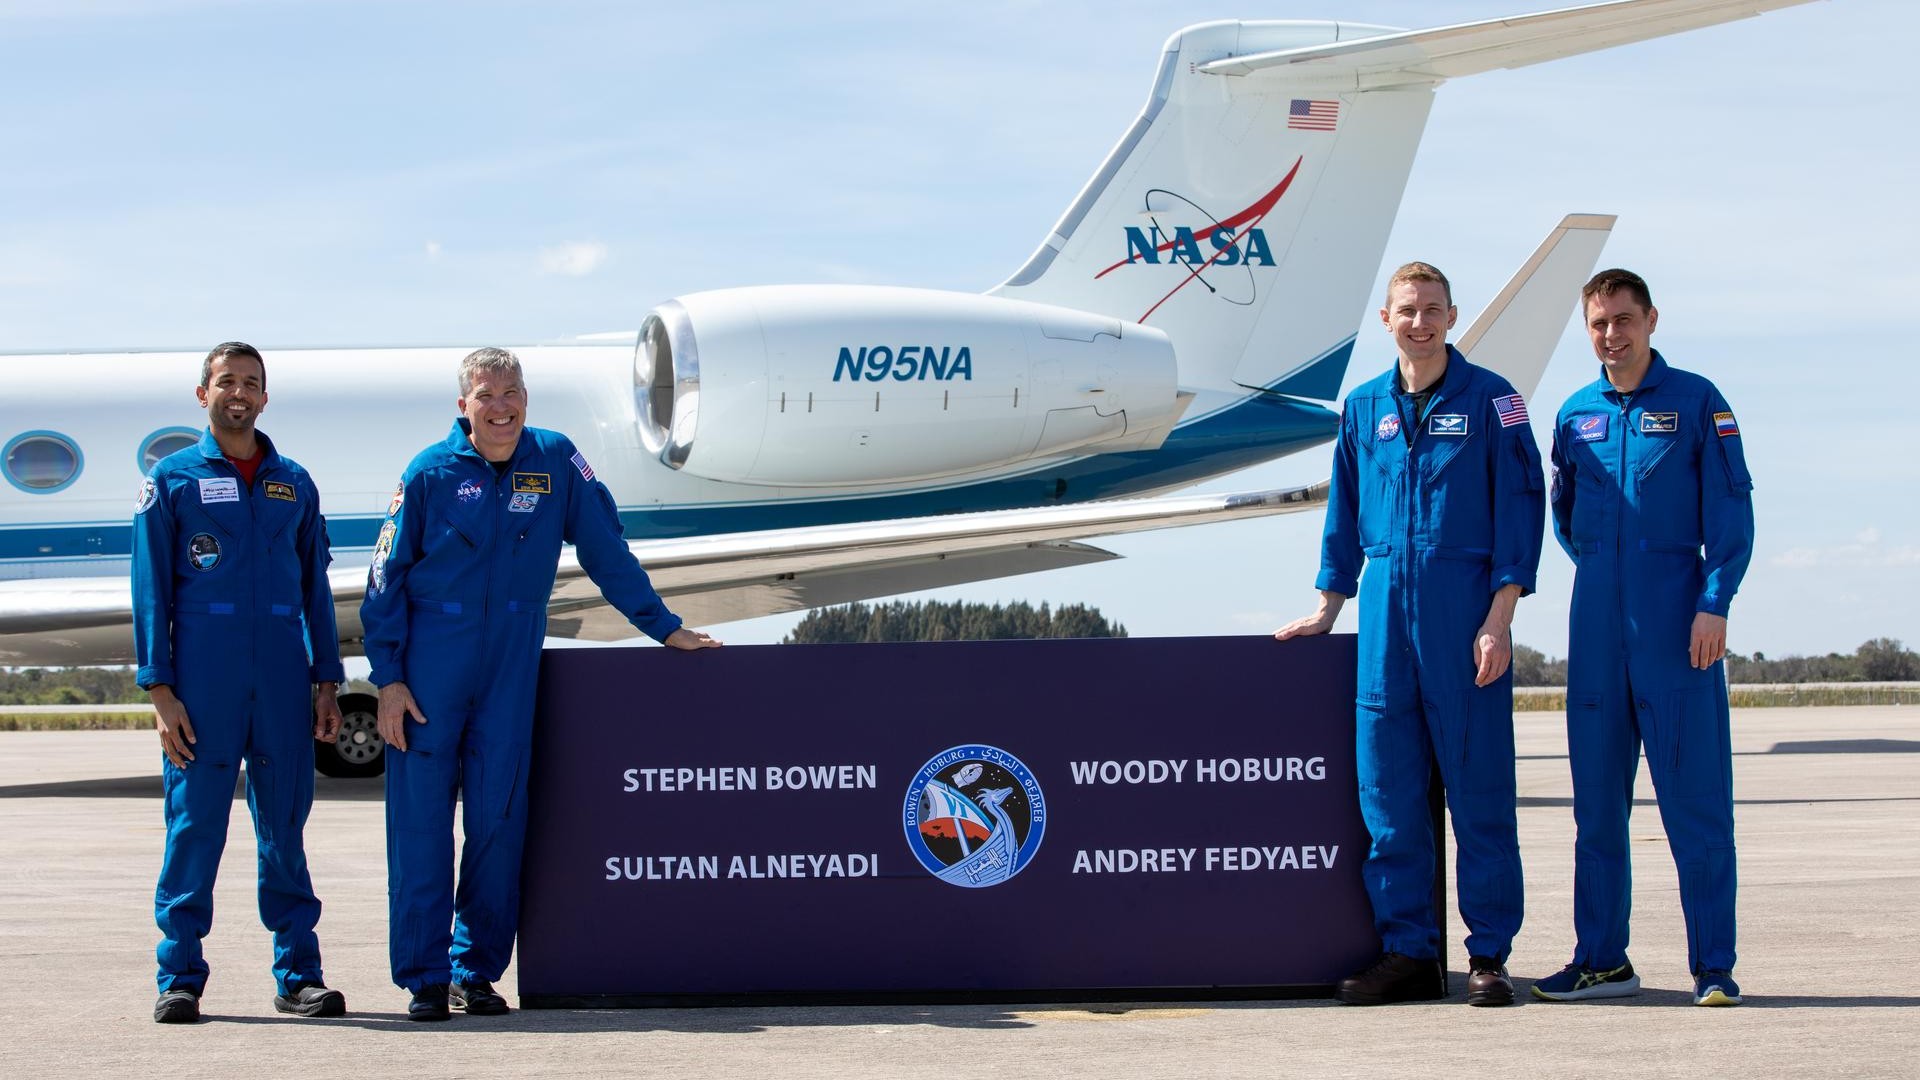 The crewmembers of SpaceX's Crew-6 mission pose after arriving on the tarmac at Kennedy Space Center.